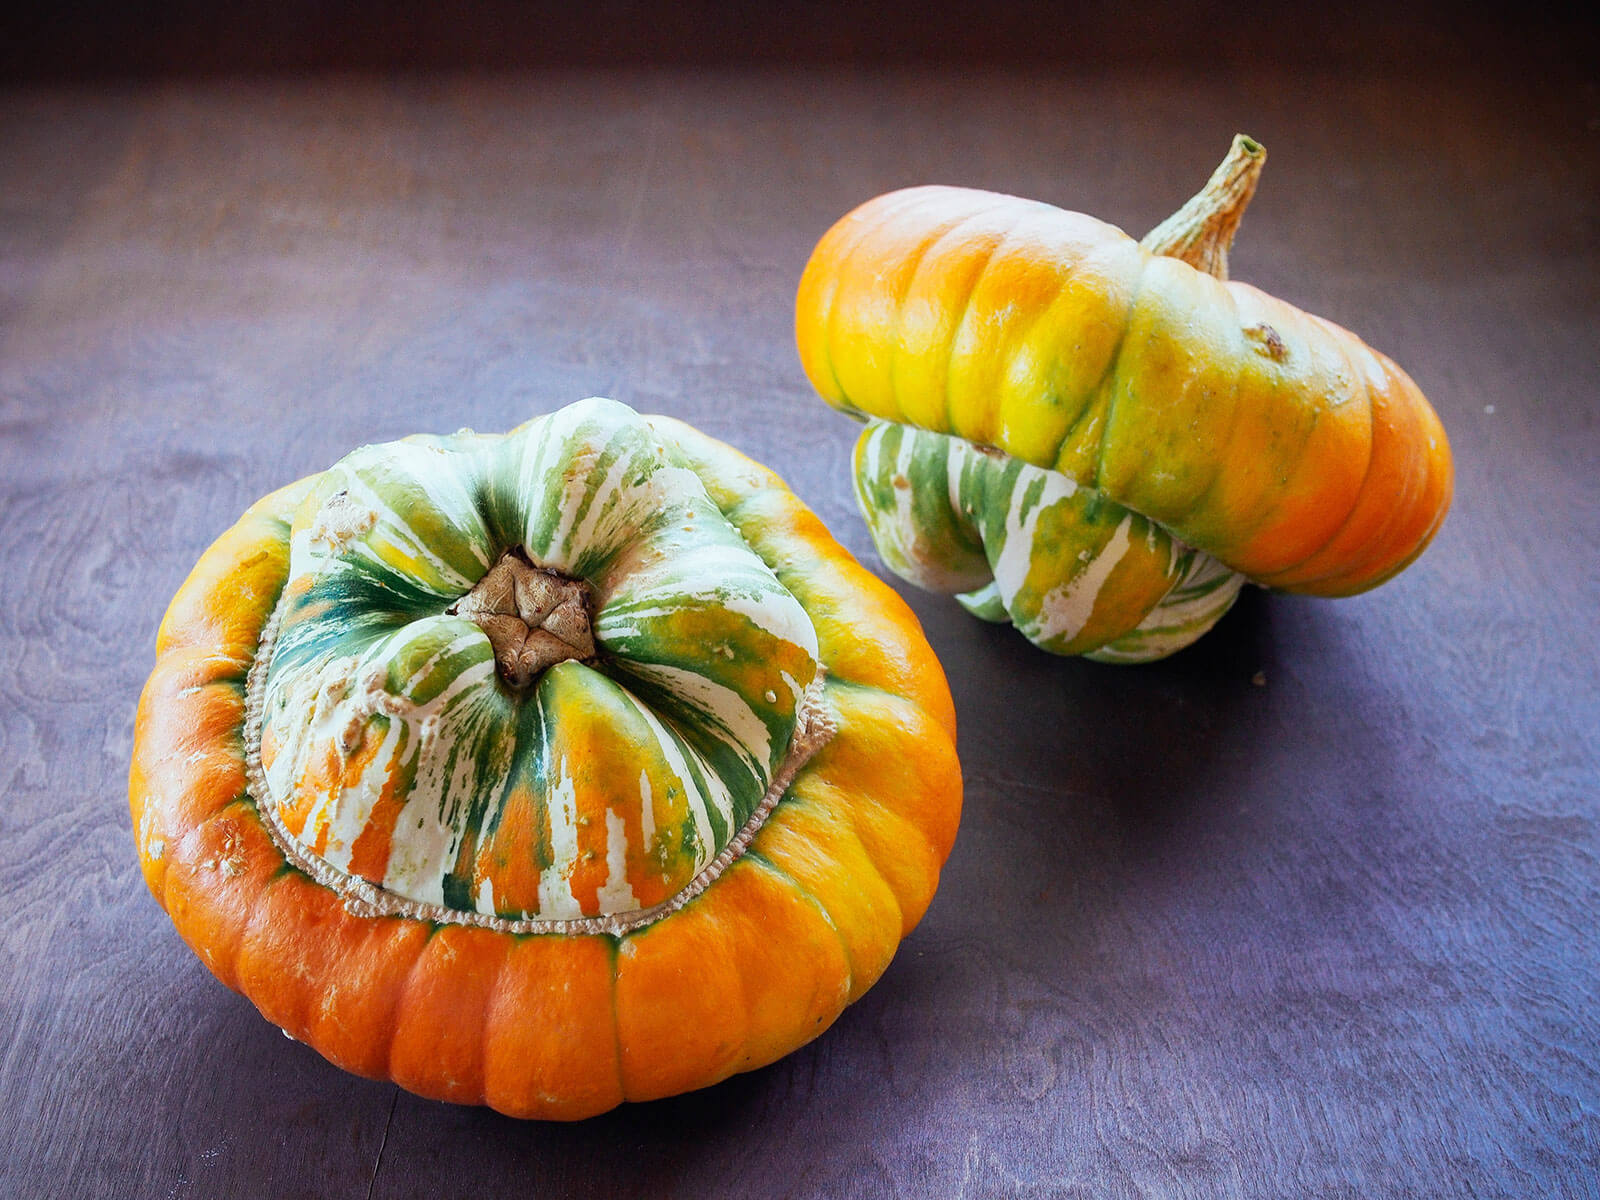 Two turban squash sitting on a wooden table